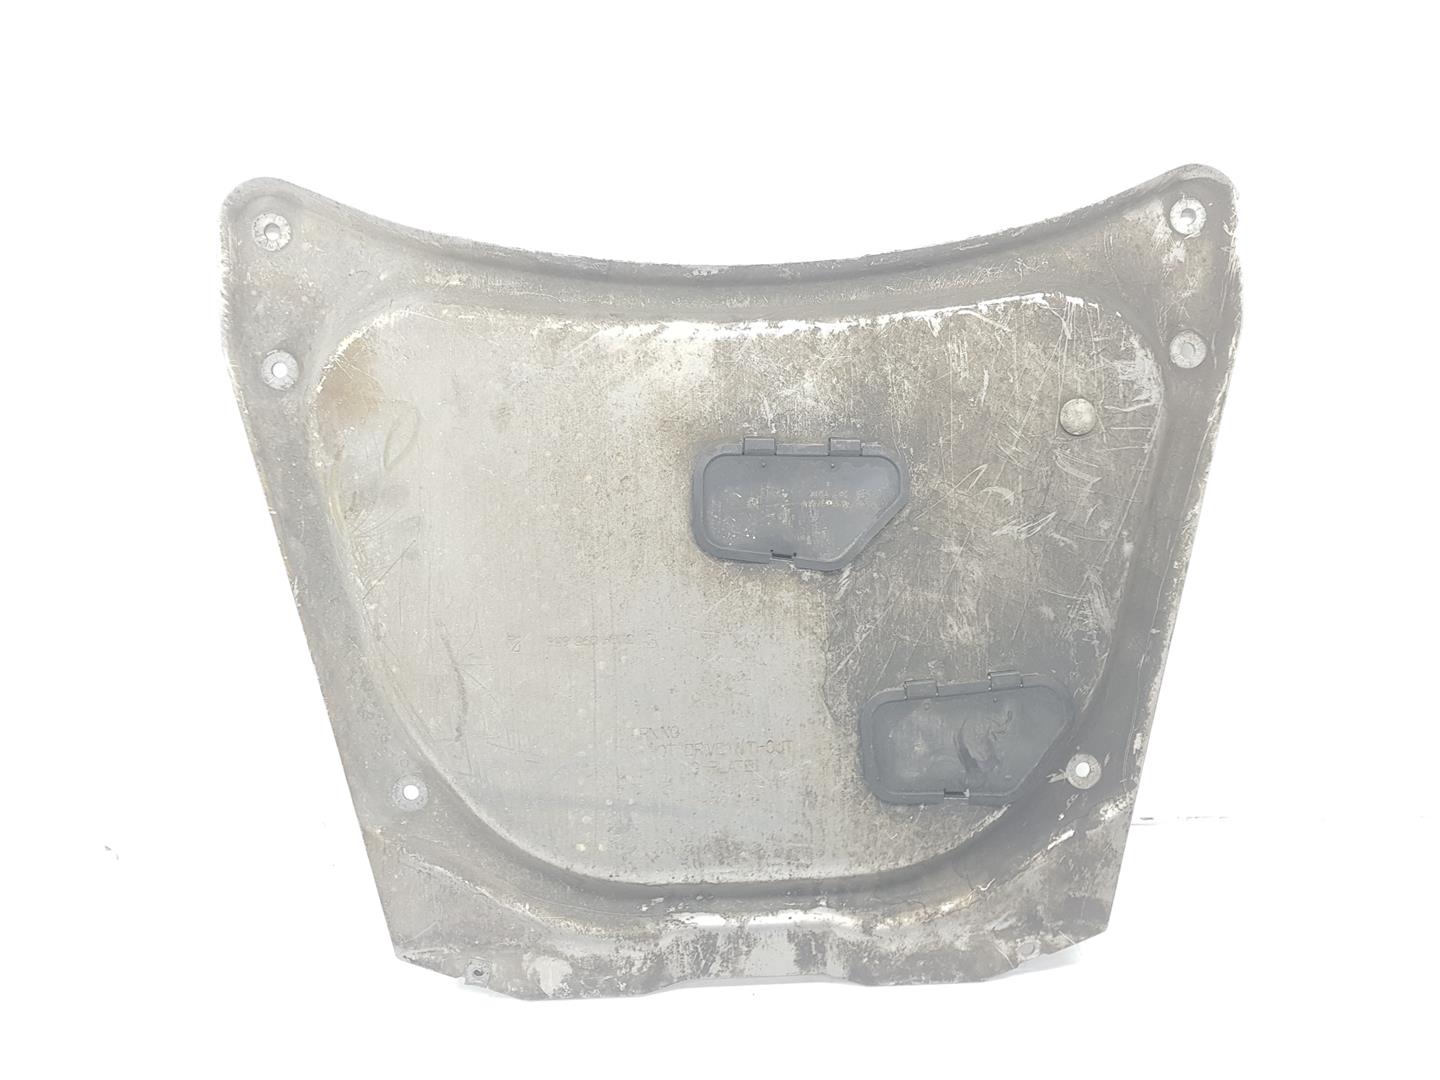 BMW X5 E53 (1999-2006) Front Engine Cover 31101095656, 31101095656 19850390